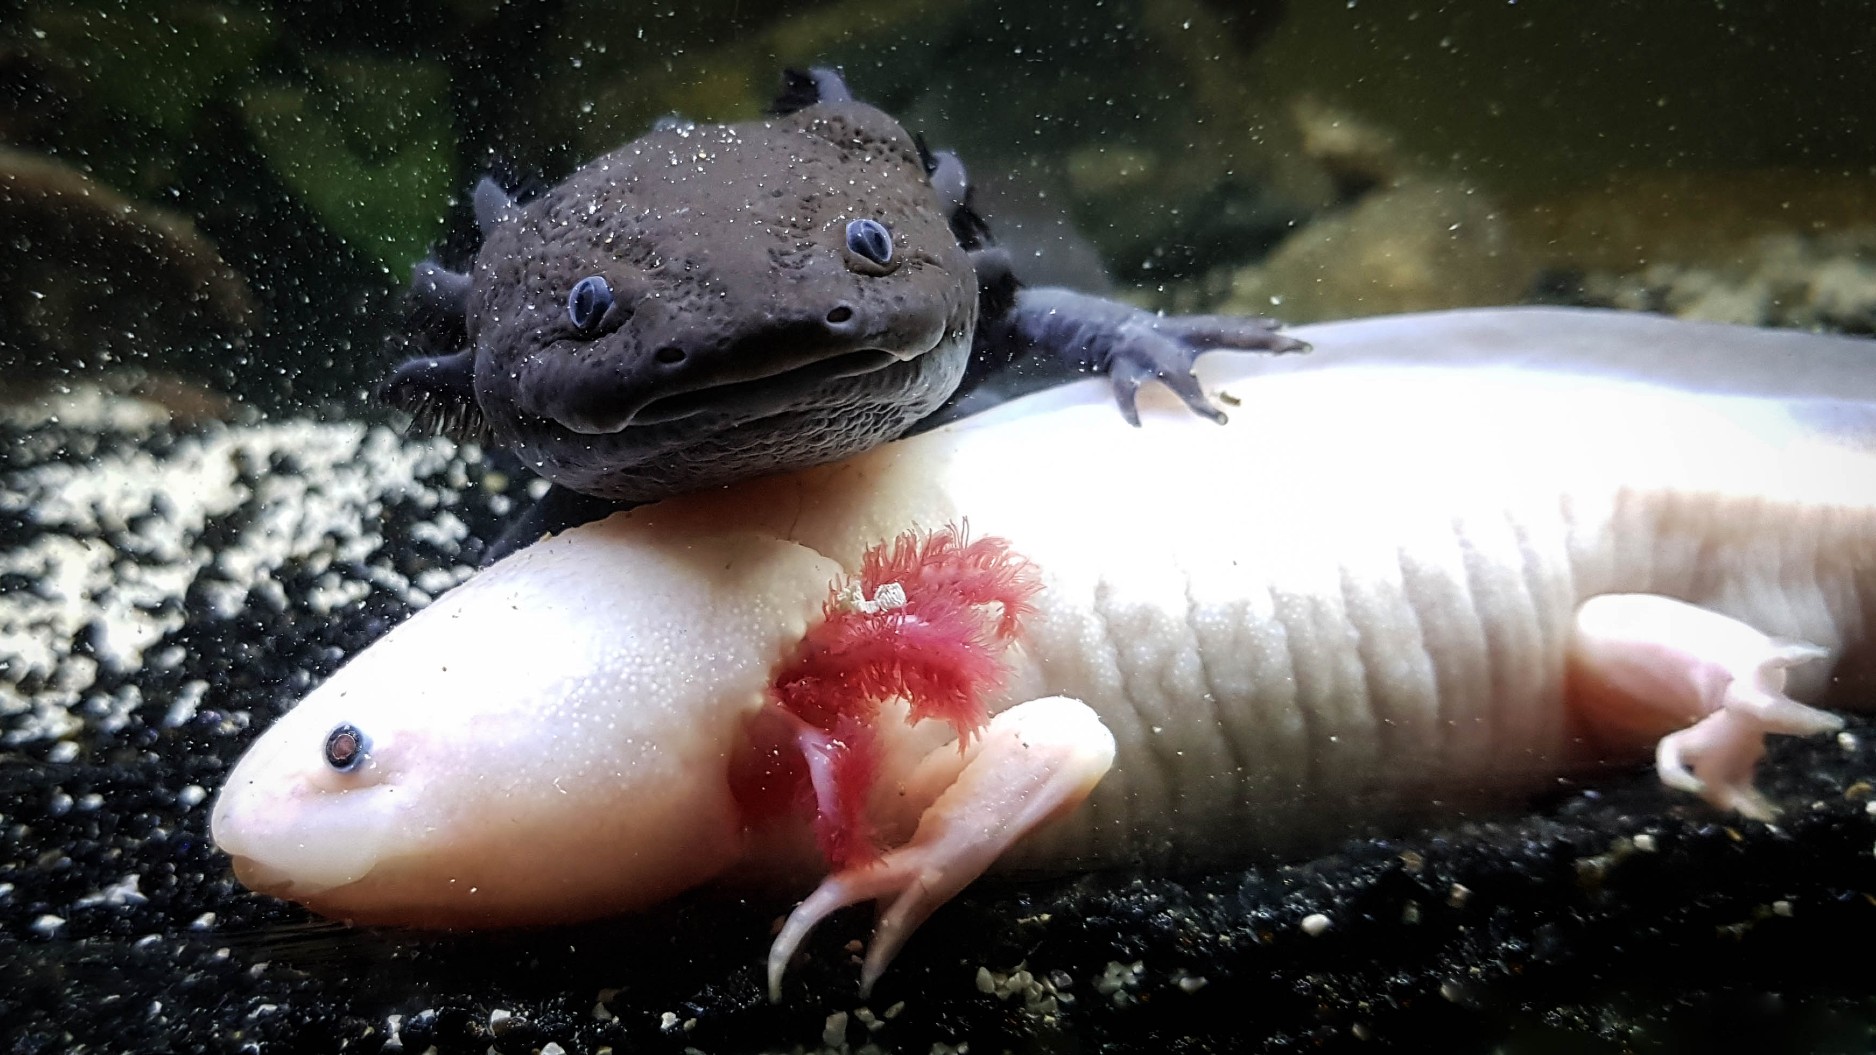 Axolotls: The adorable, giant salamanders of Mexico | Live Science